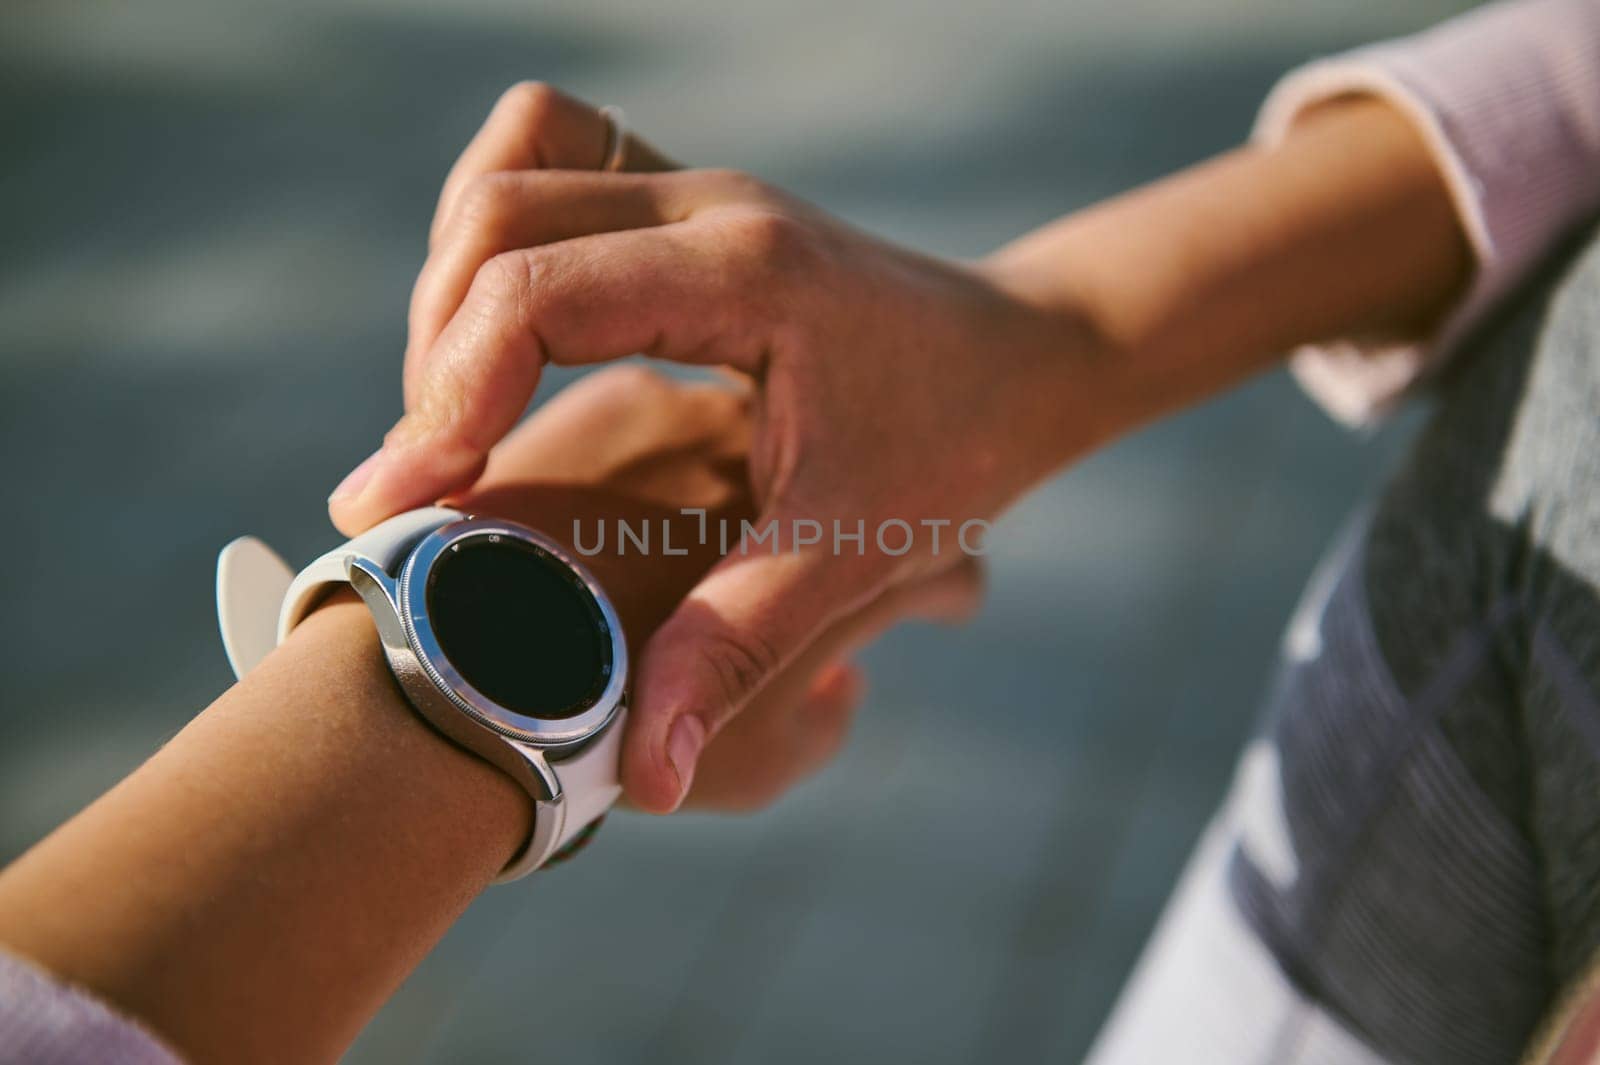 Close-up hands of female athlete checking application and heart rate on her smart watch during outdoor cardio workout by artgf